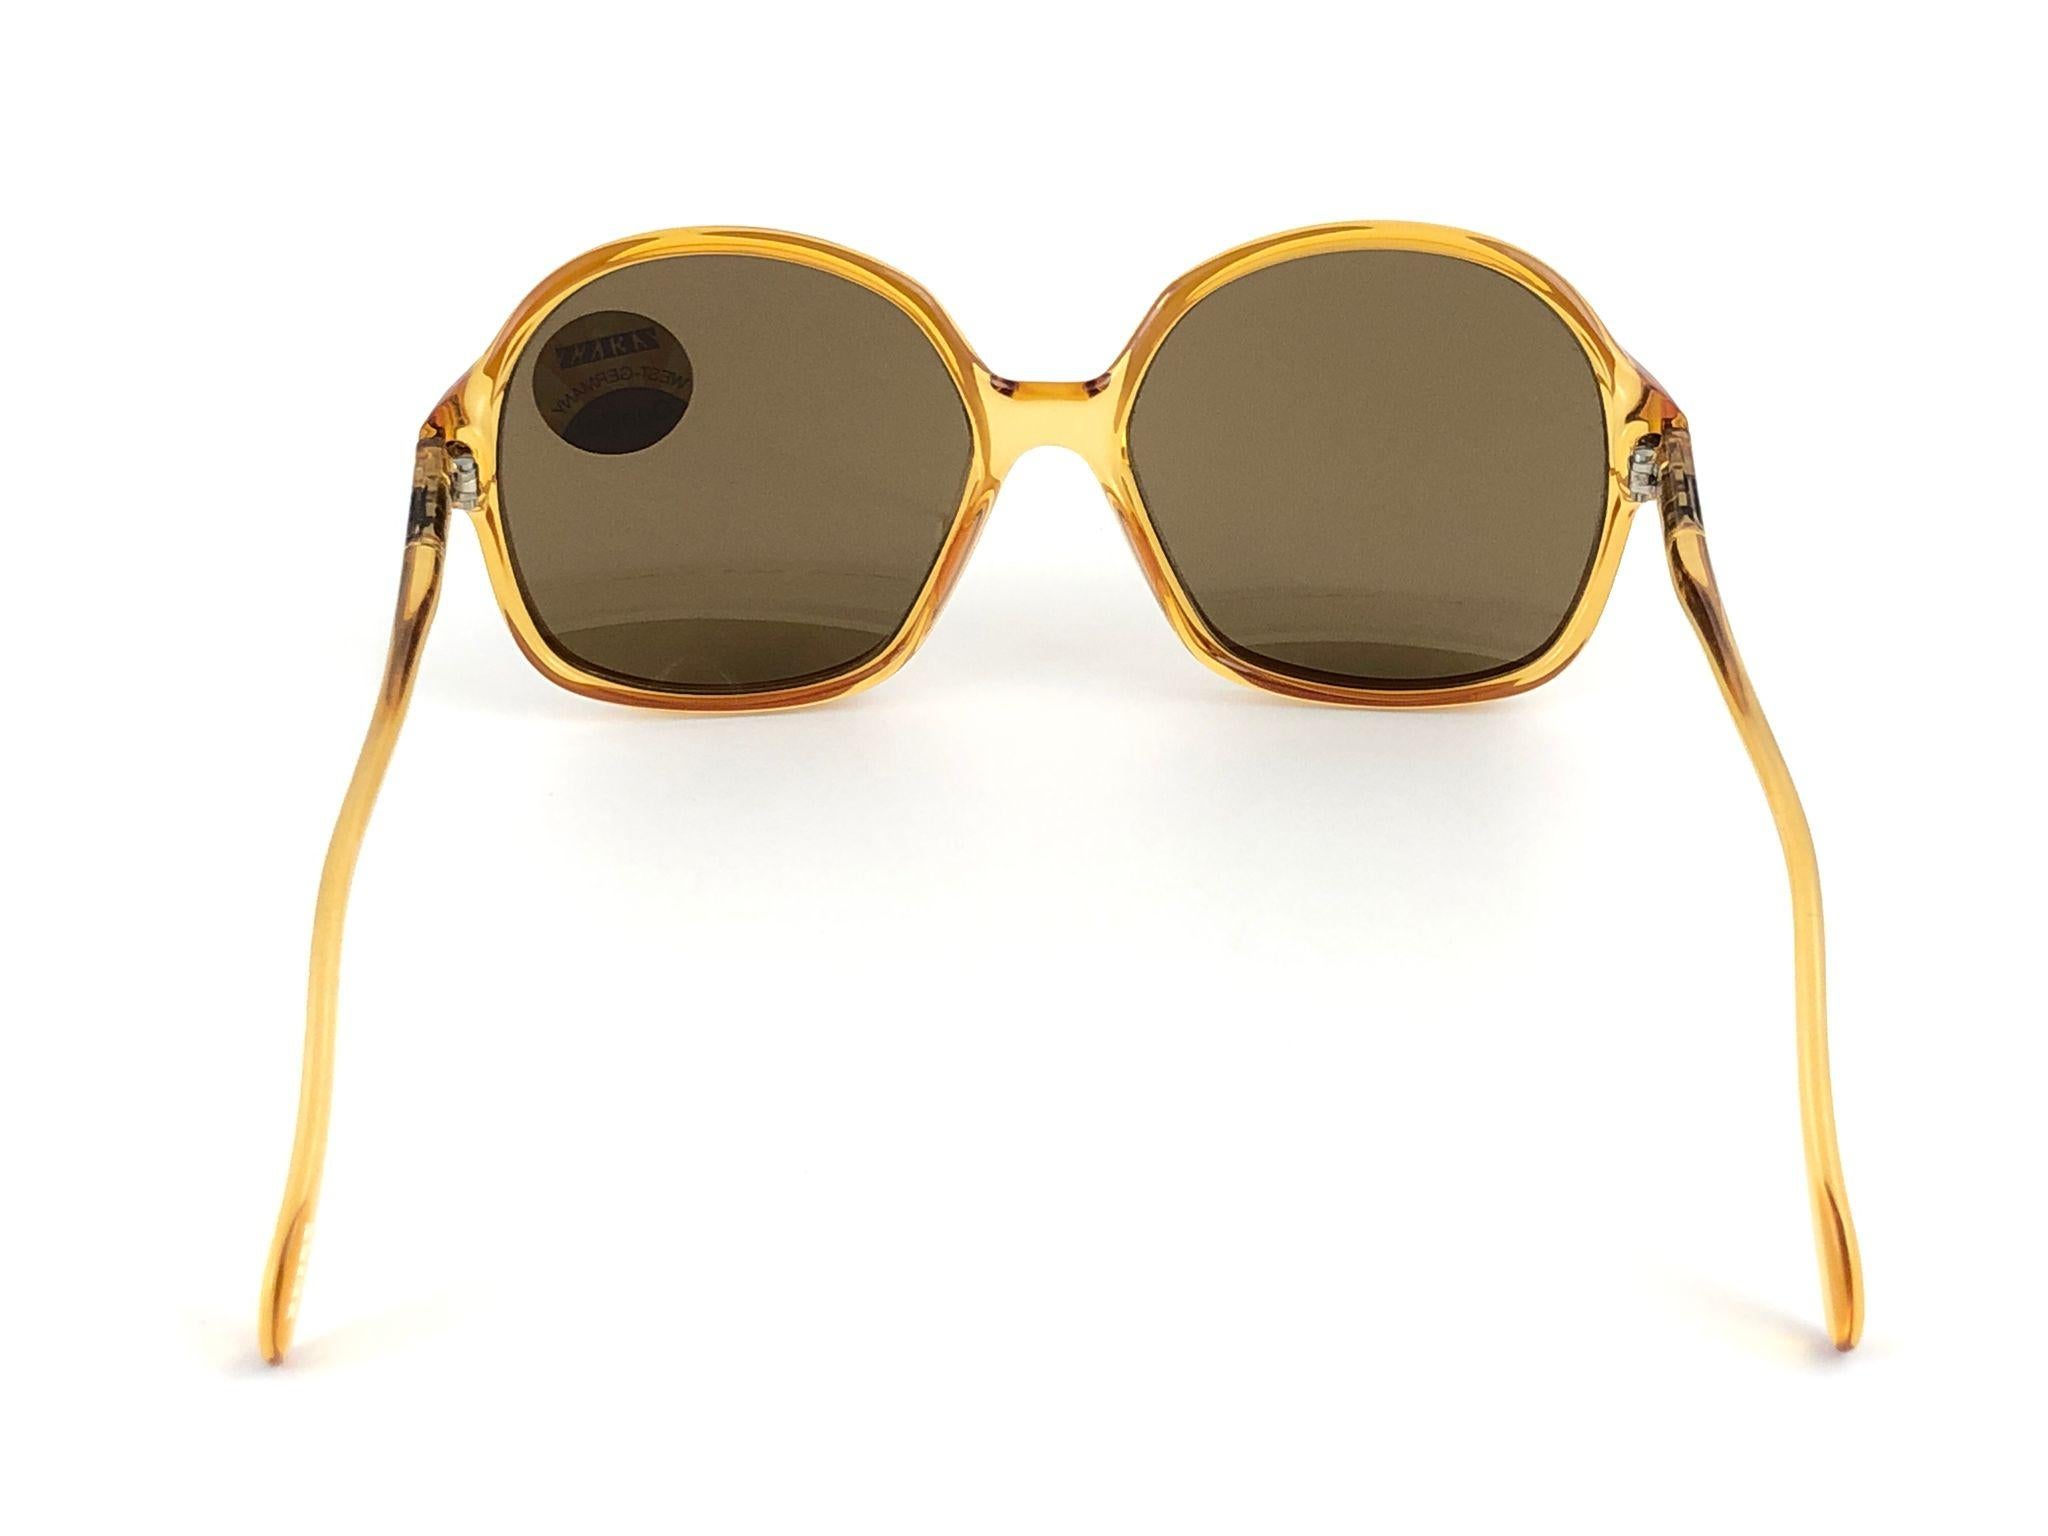 New Vintage Zeiss 8076 Translucent Amber Made W. Germany 1970 Sunglasses 1